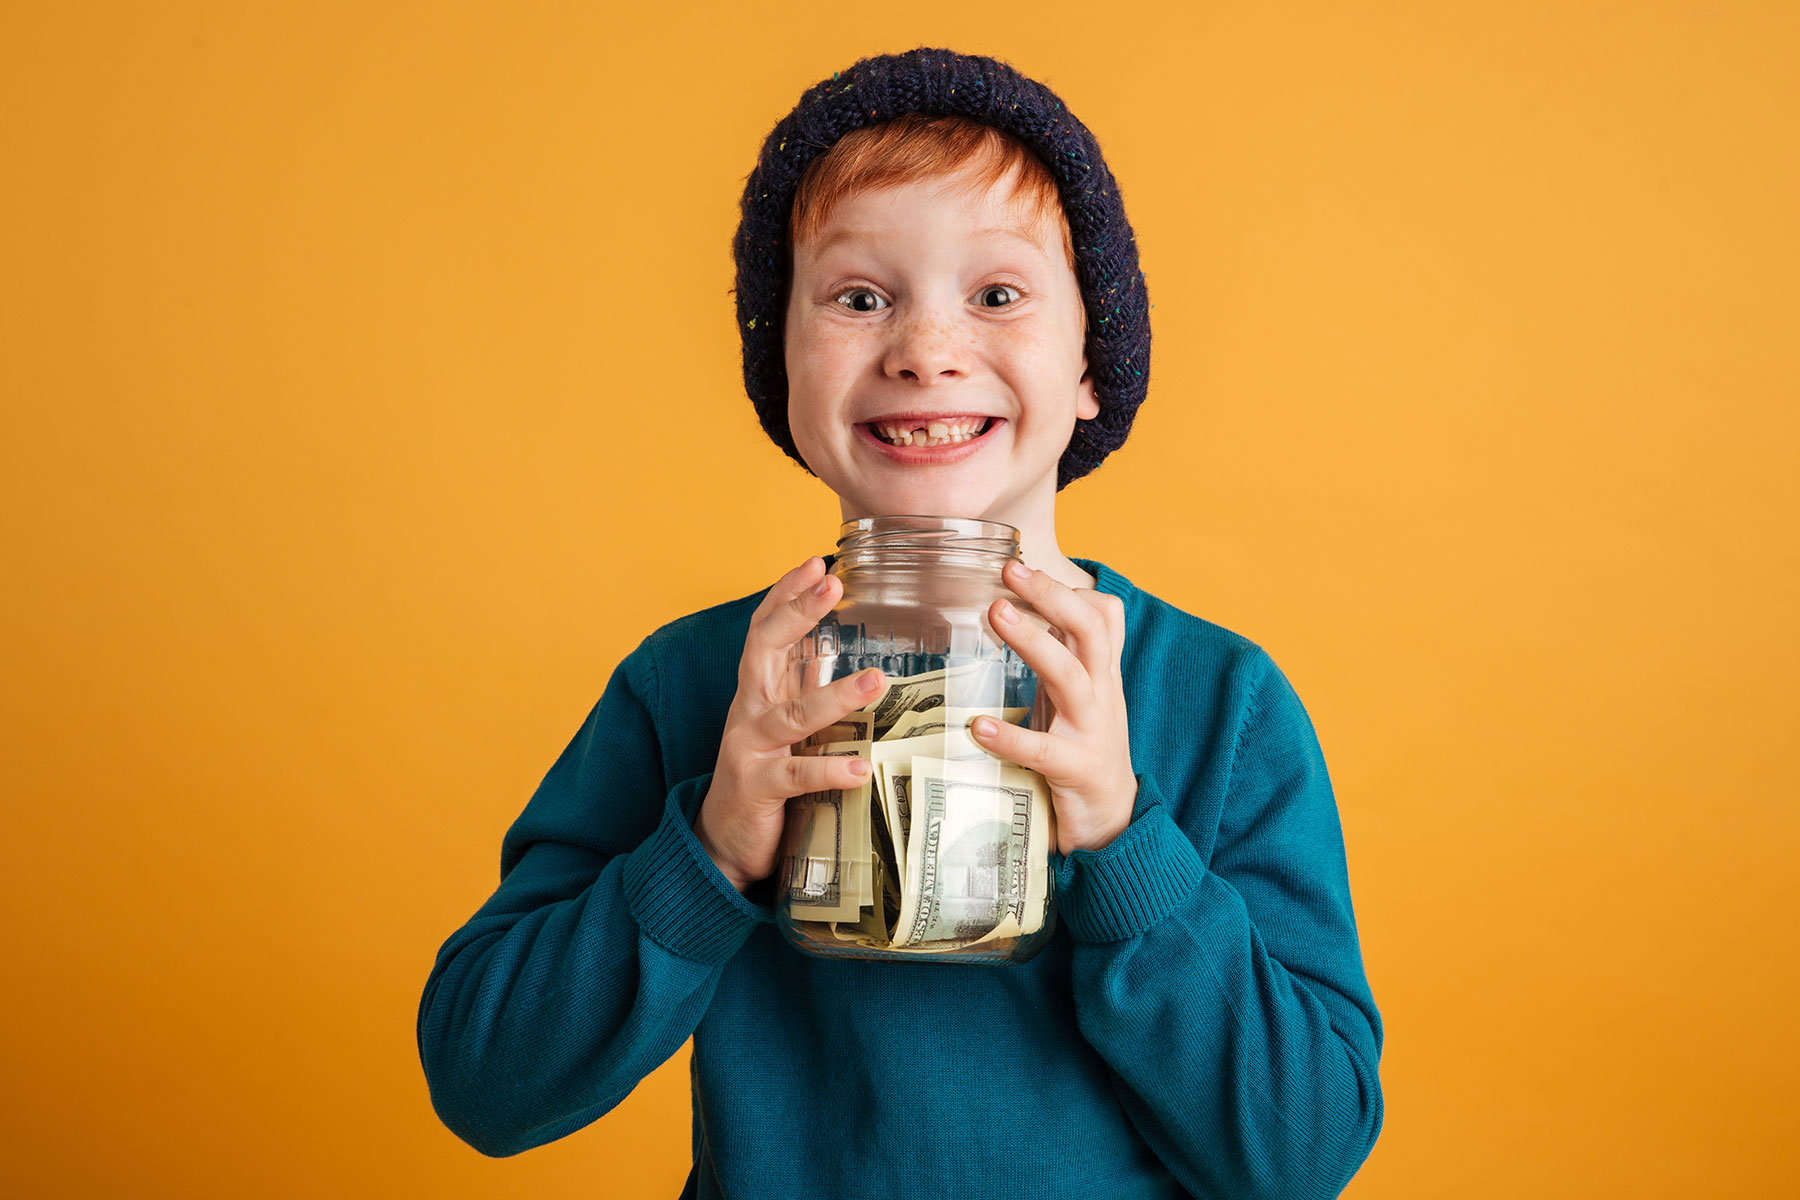 Young boy with red hair and a beanie on holding a large clear jar  filled with cash in front of a yellow background